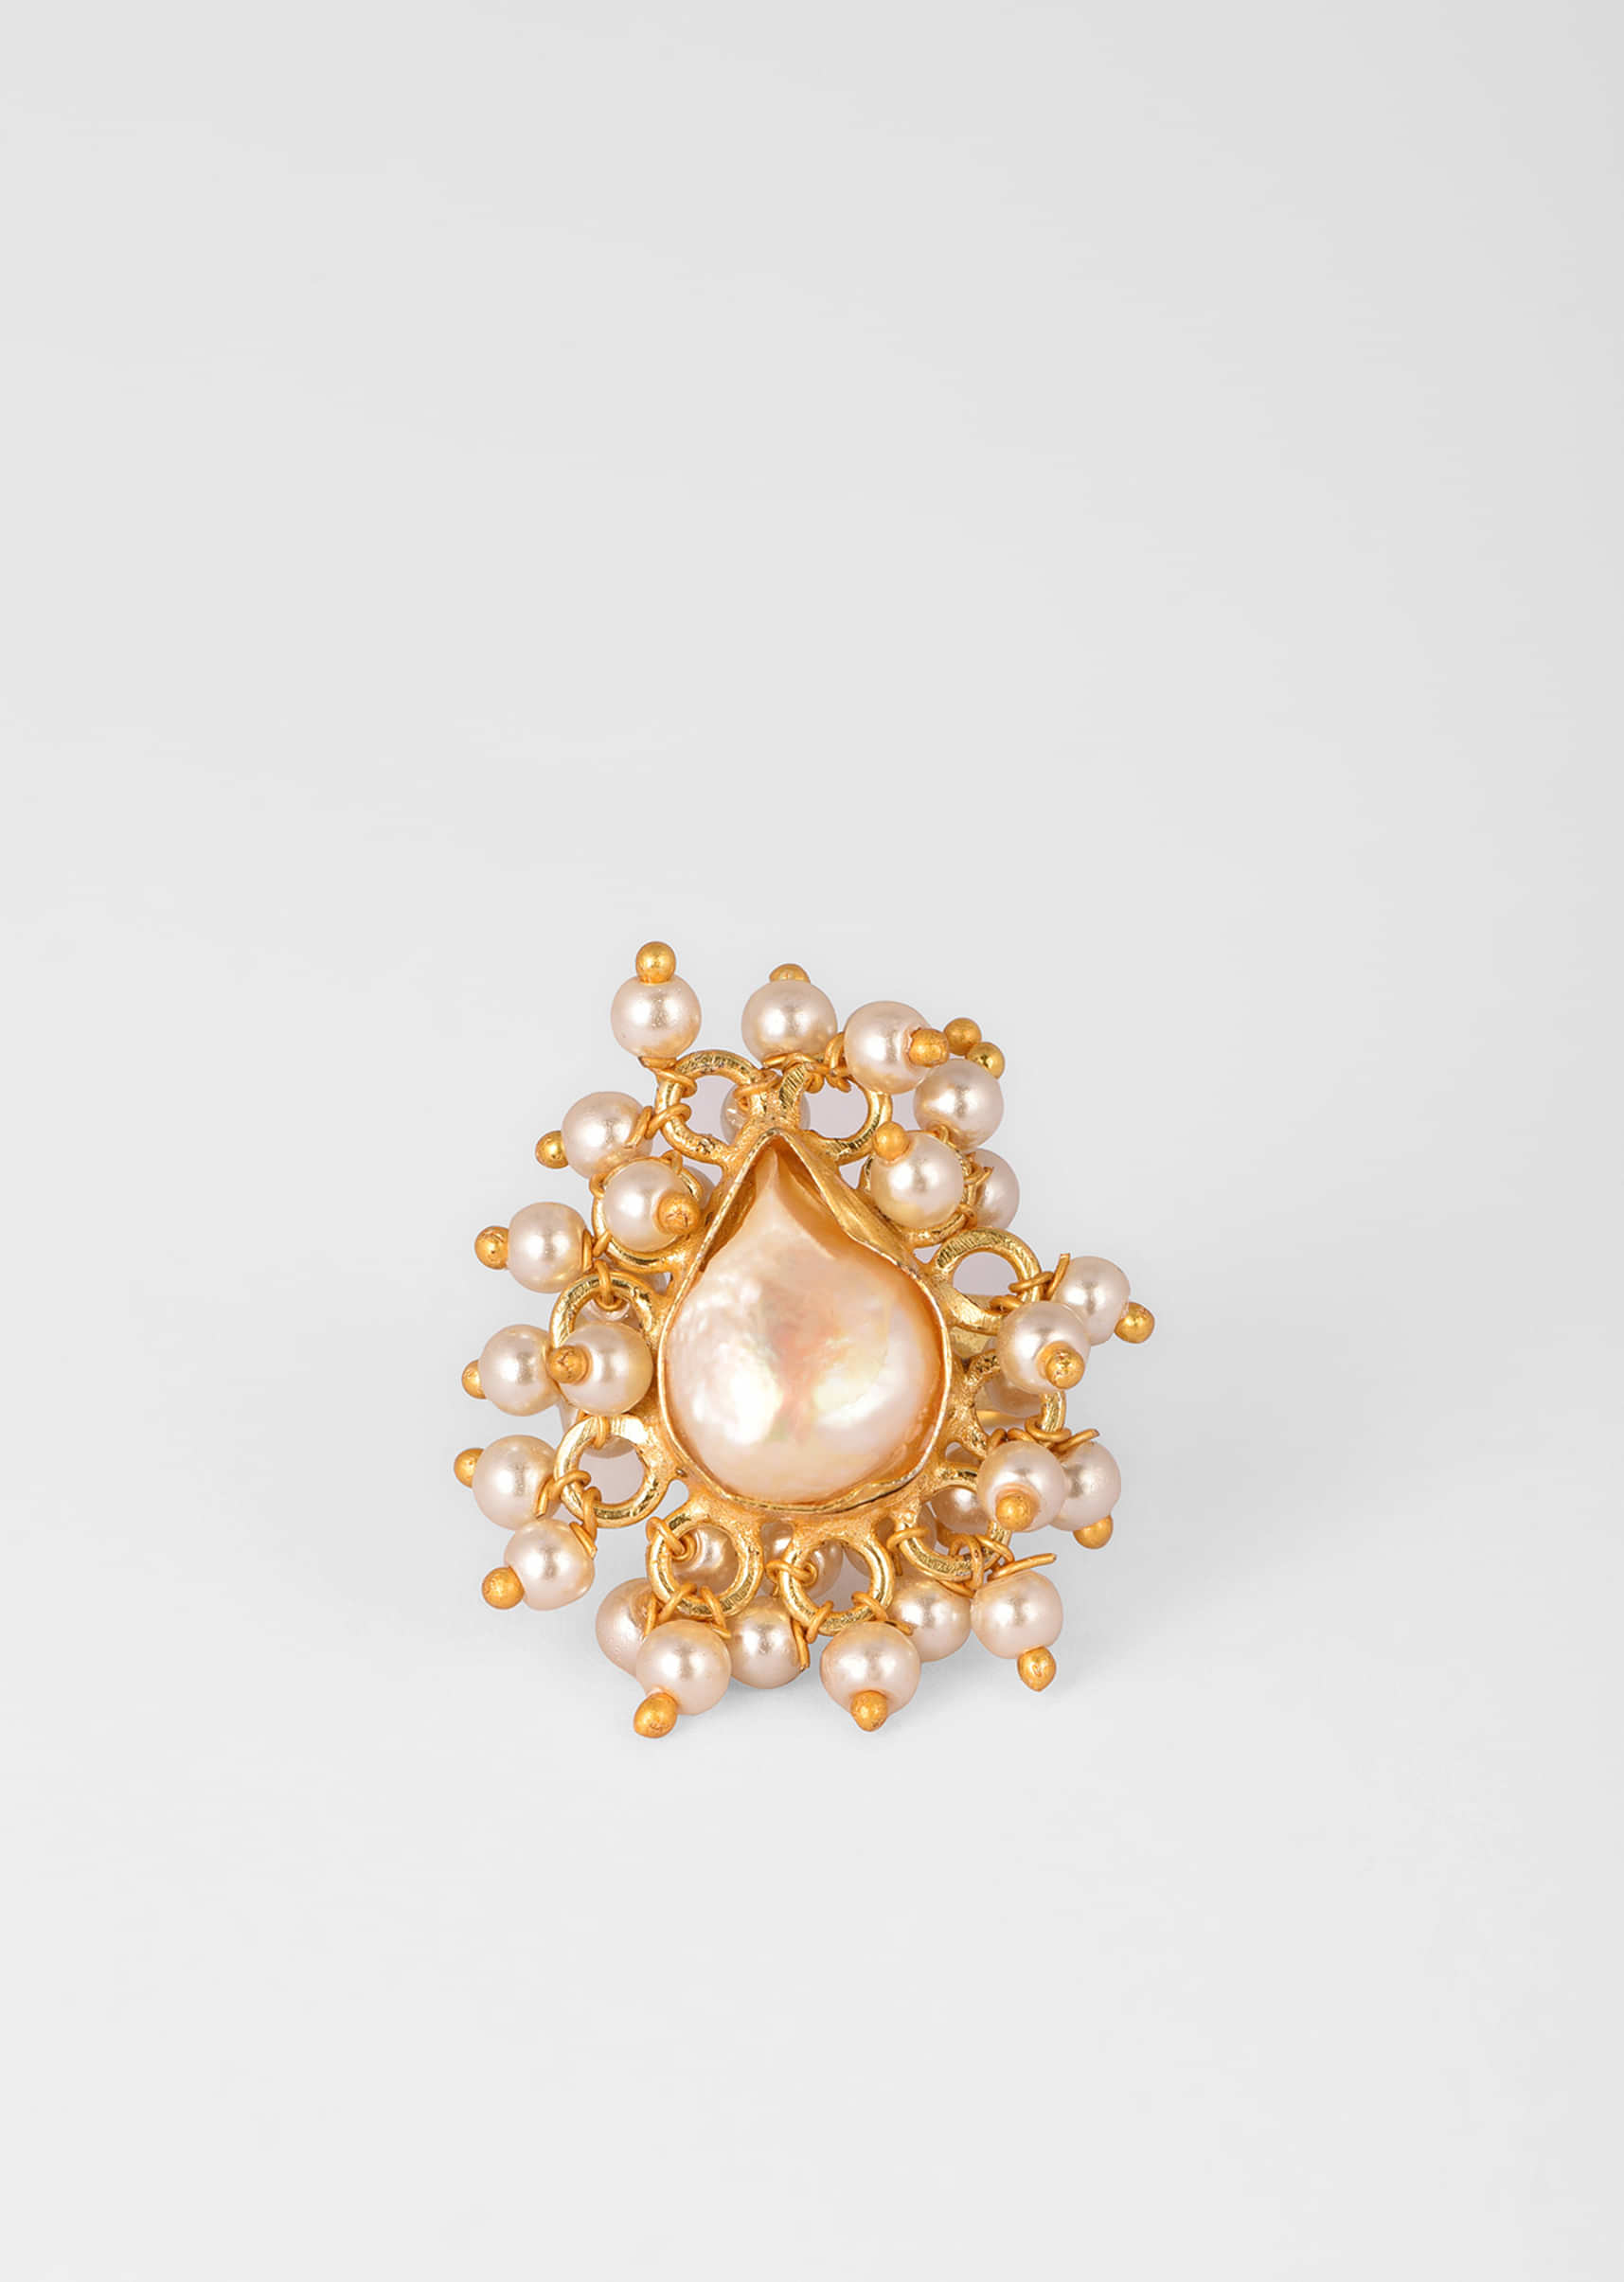 Gold Plated Ring With A Drop Shaped Baroque Pearl Centre And Tiny Pearls 